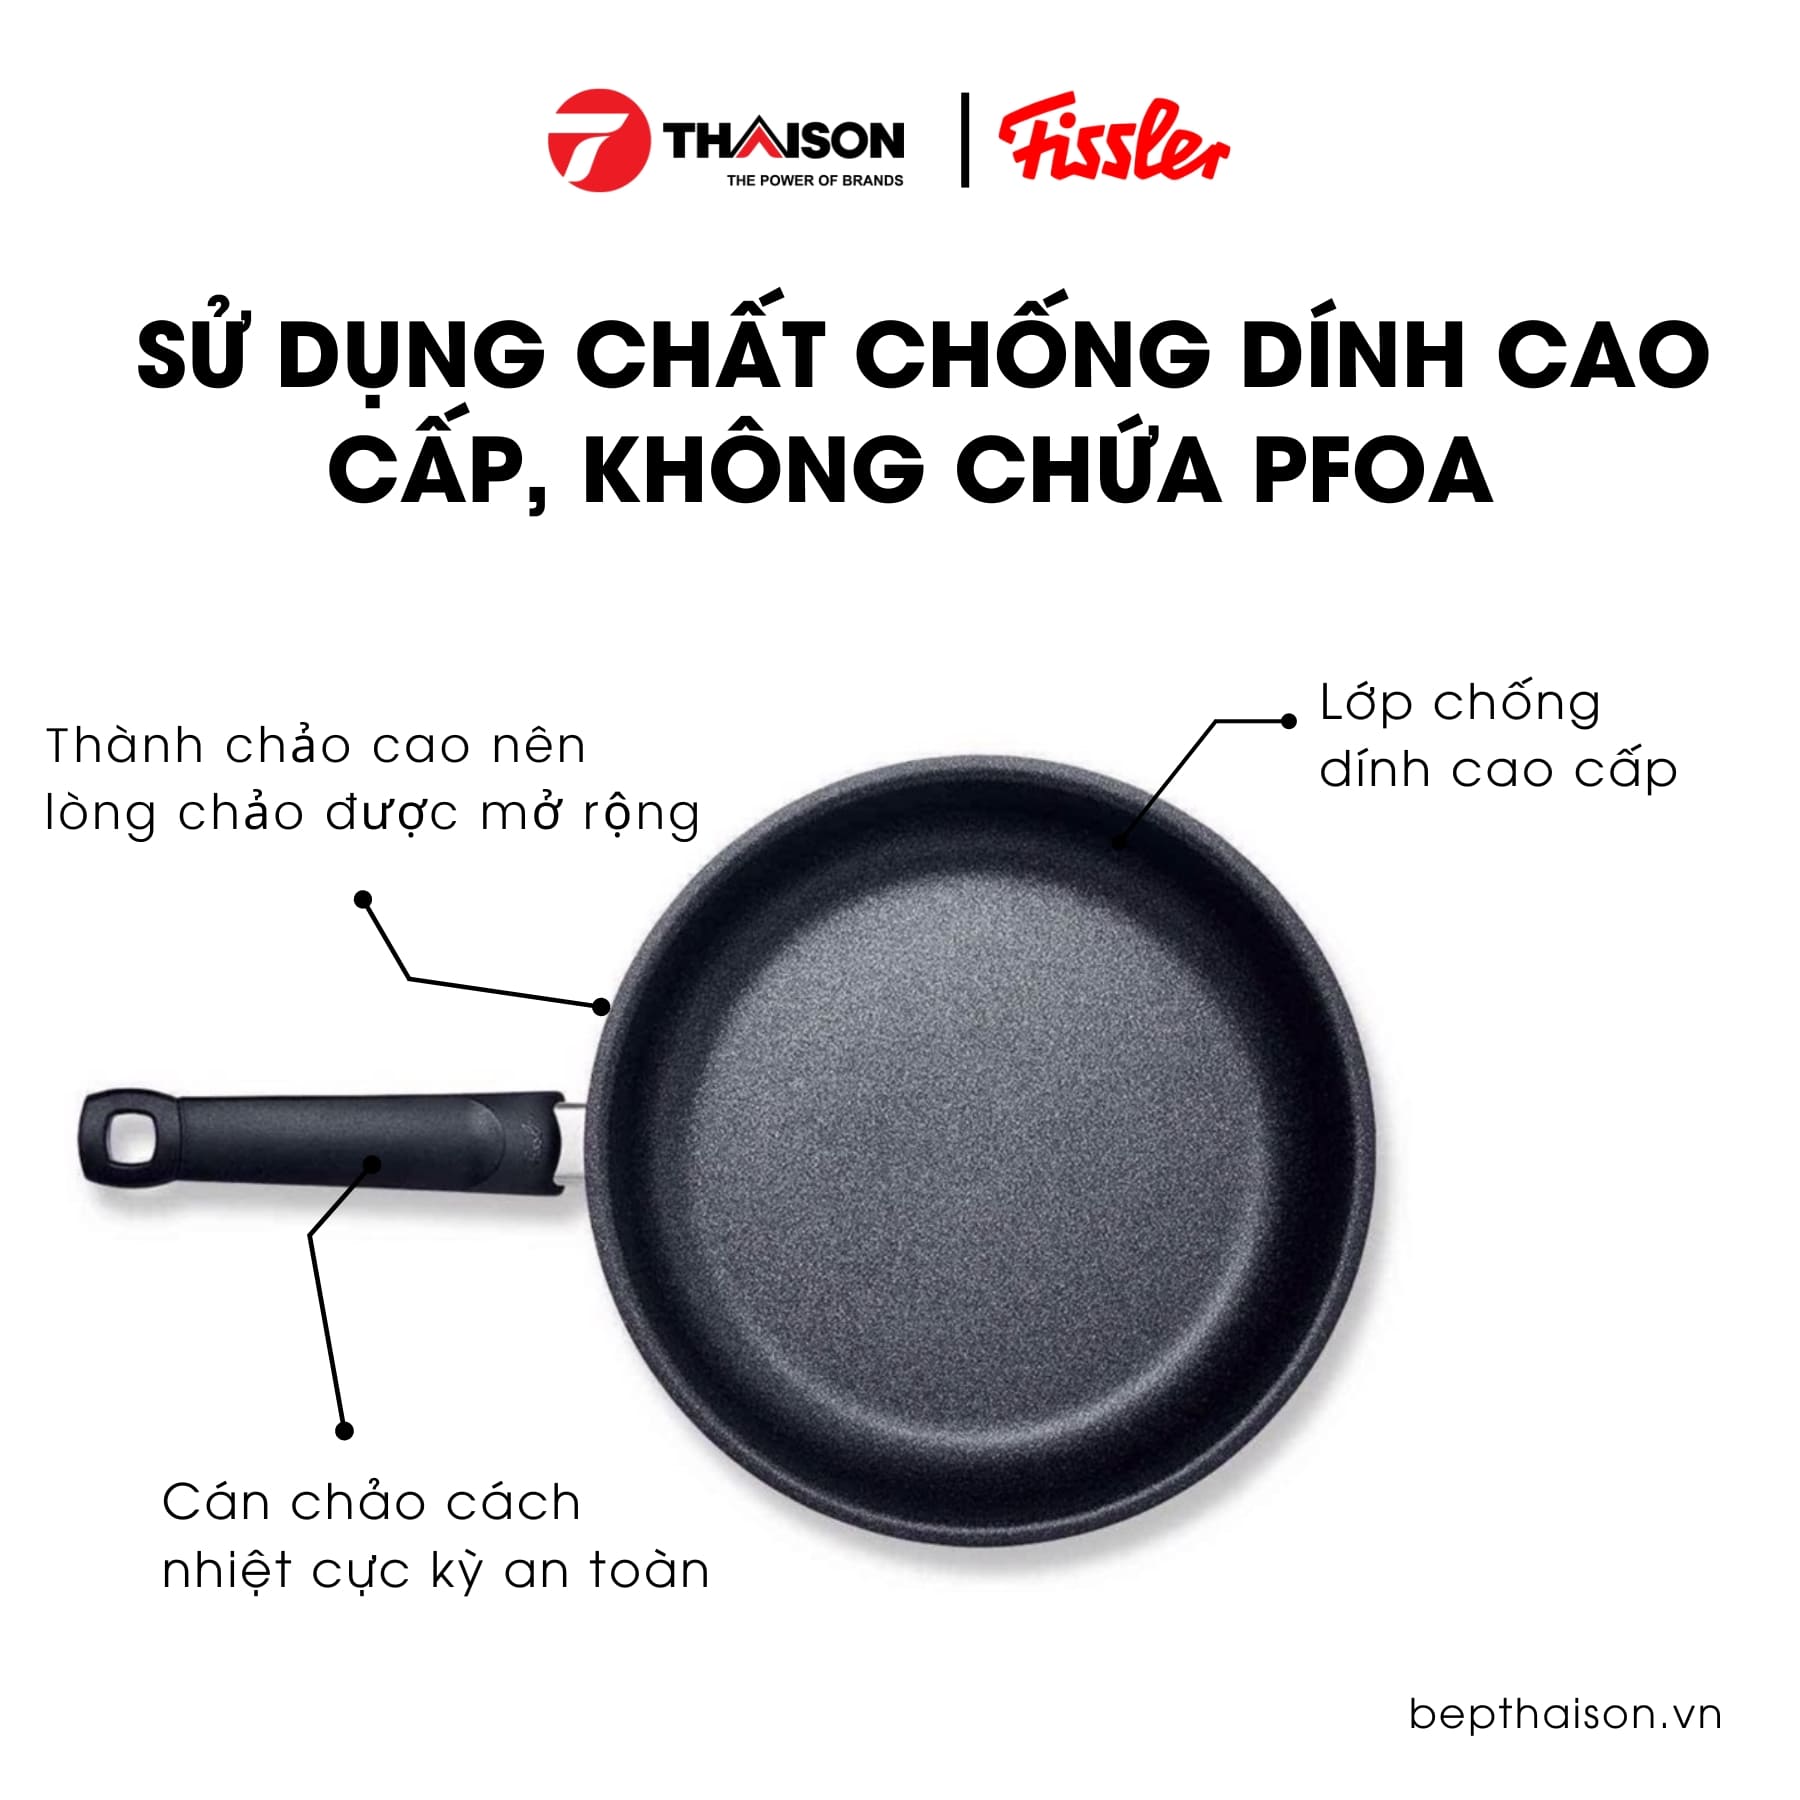 Chảo Fissler thiết kế